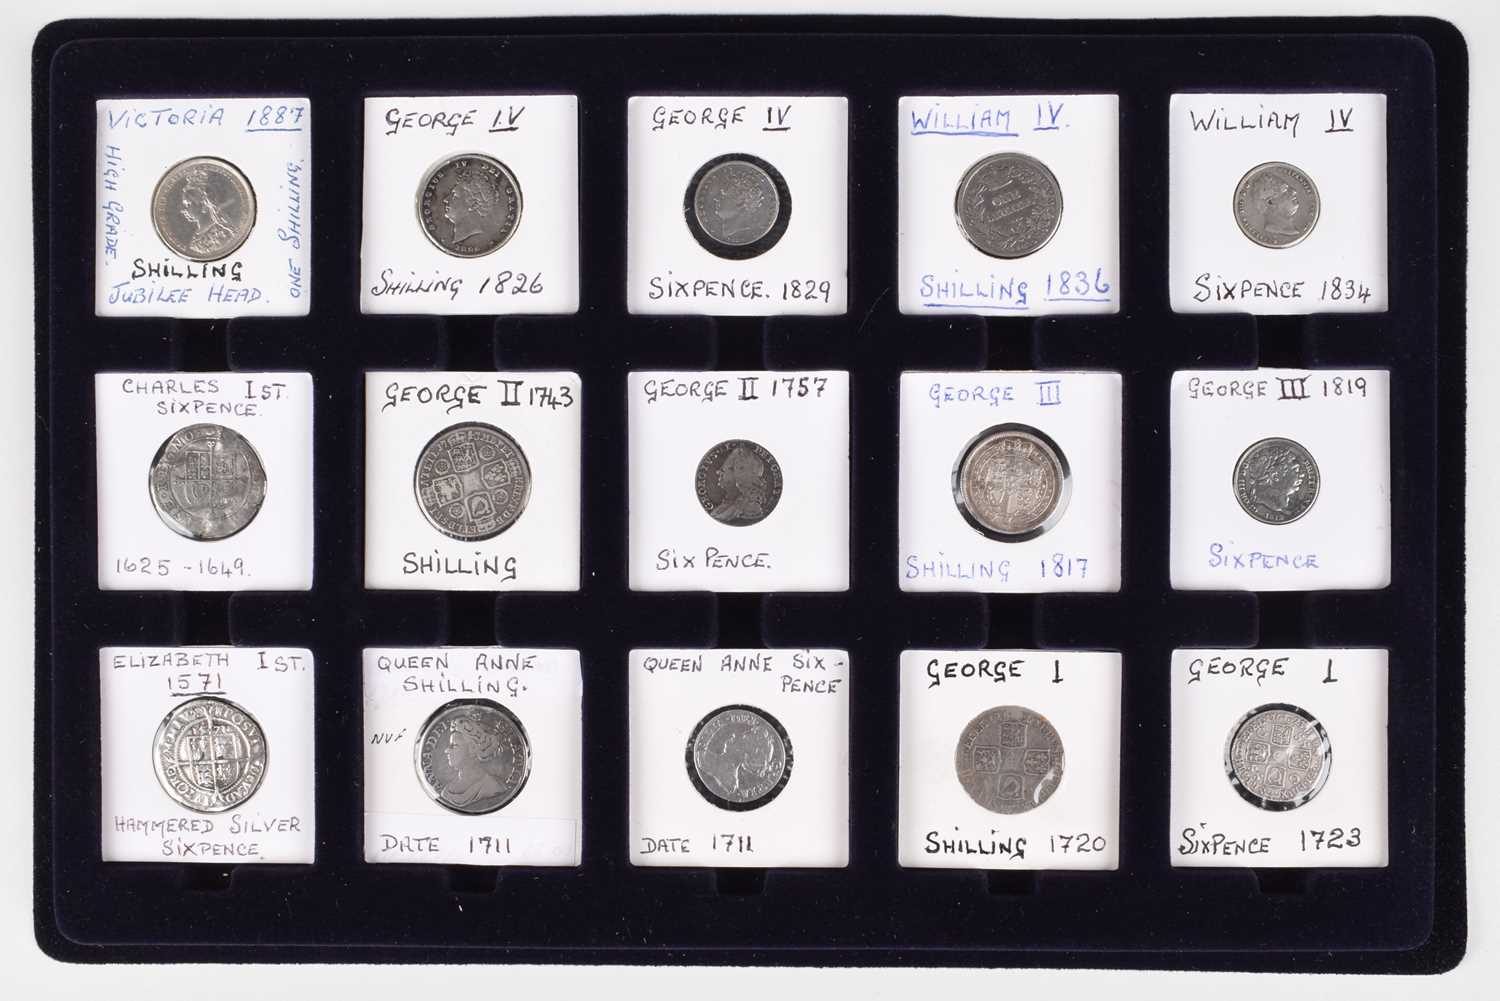 Tray of silver Shillings and Sixpences from Elizabeth I through to William IV (15).